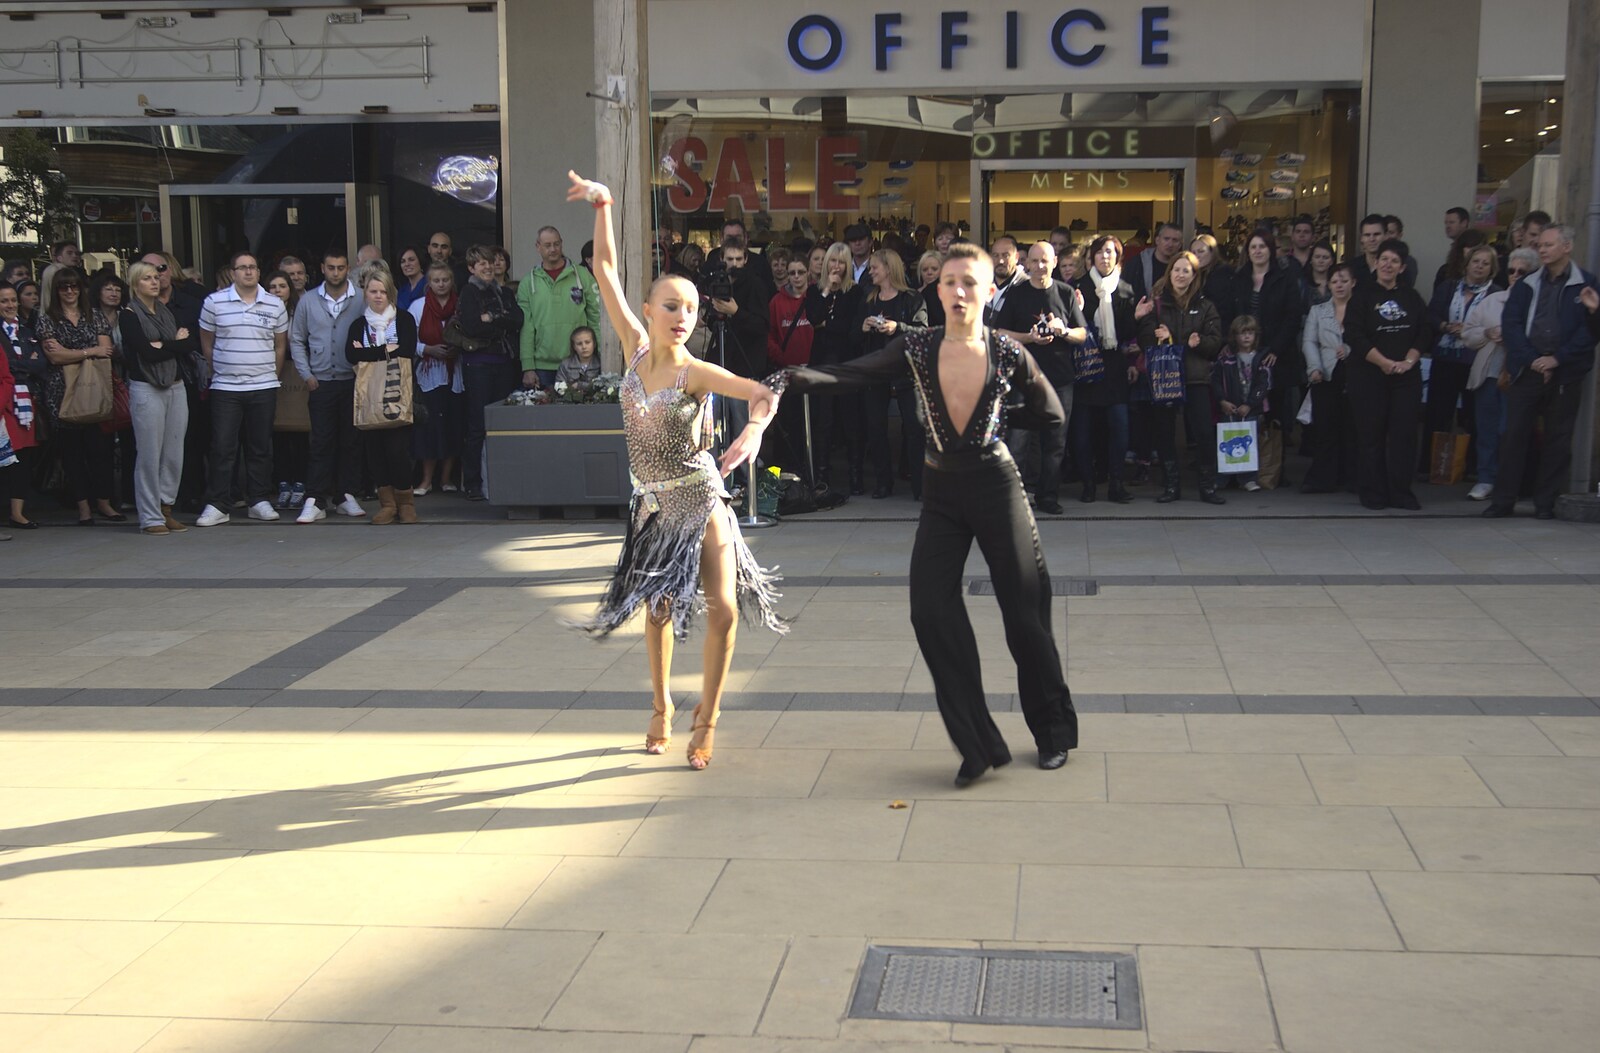 More 'Strictly' action from Norwich By Train, Norfolk - 16th October 2010